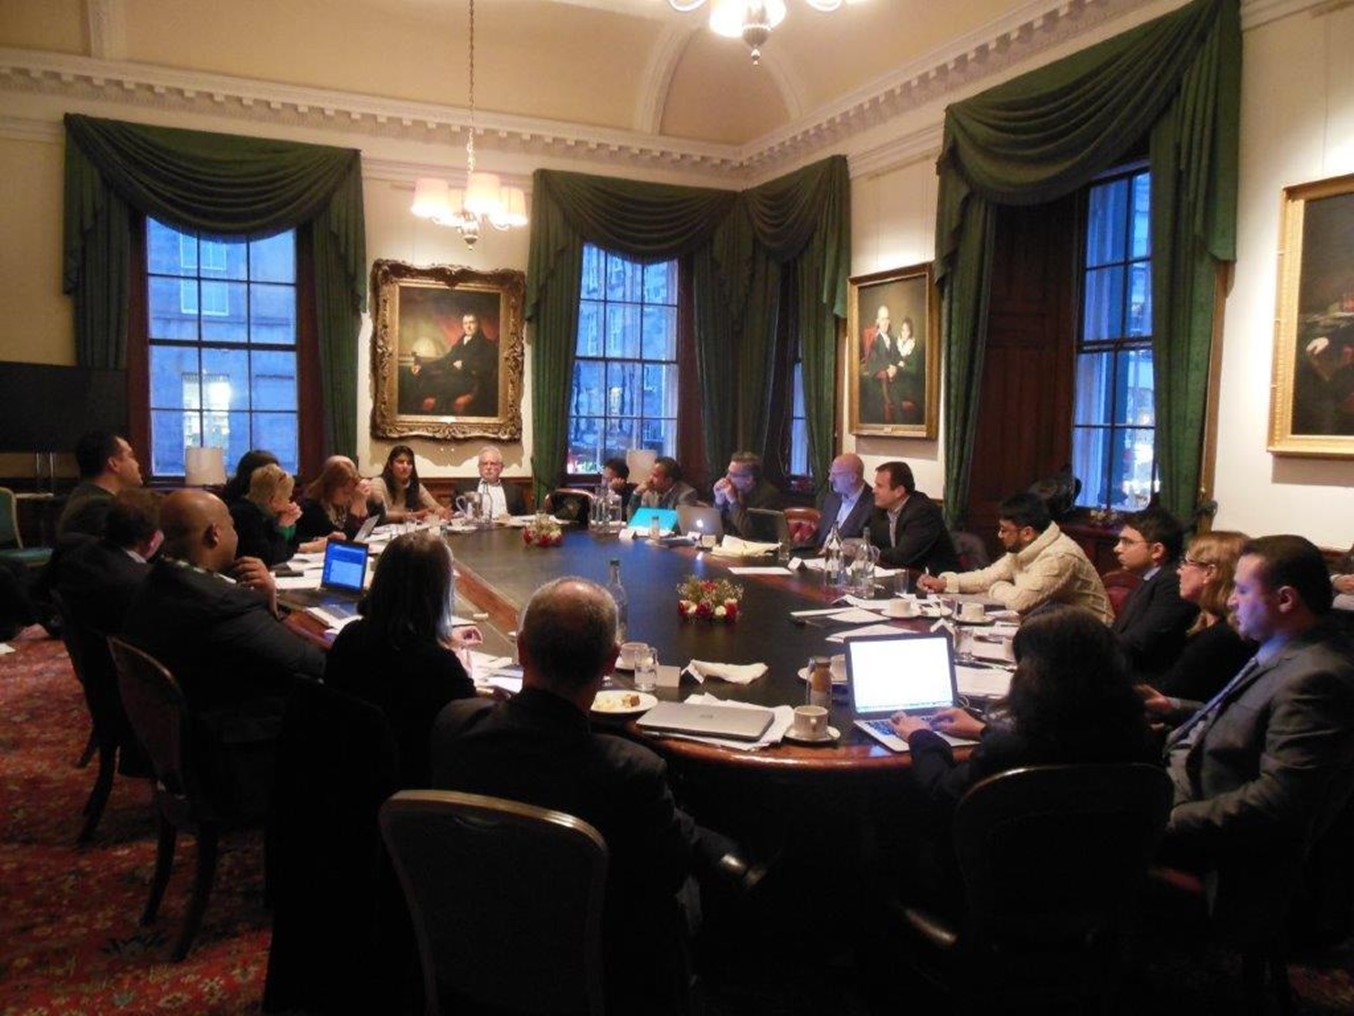 Participants at the First Edinburgh Dialogue Conference on Interim Constitutions in Post-Conflict Settings (2014)